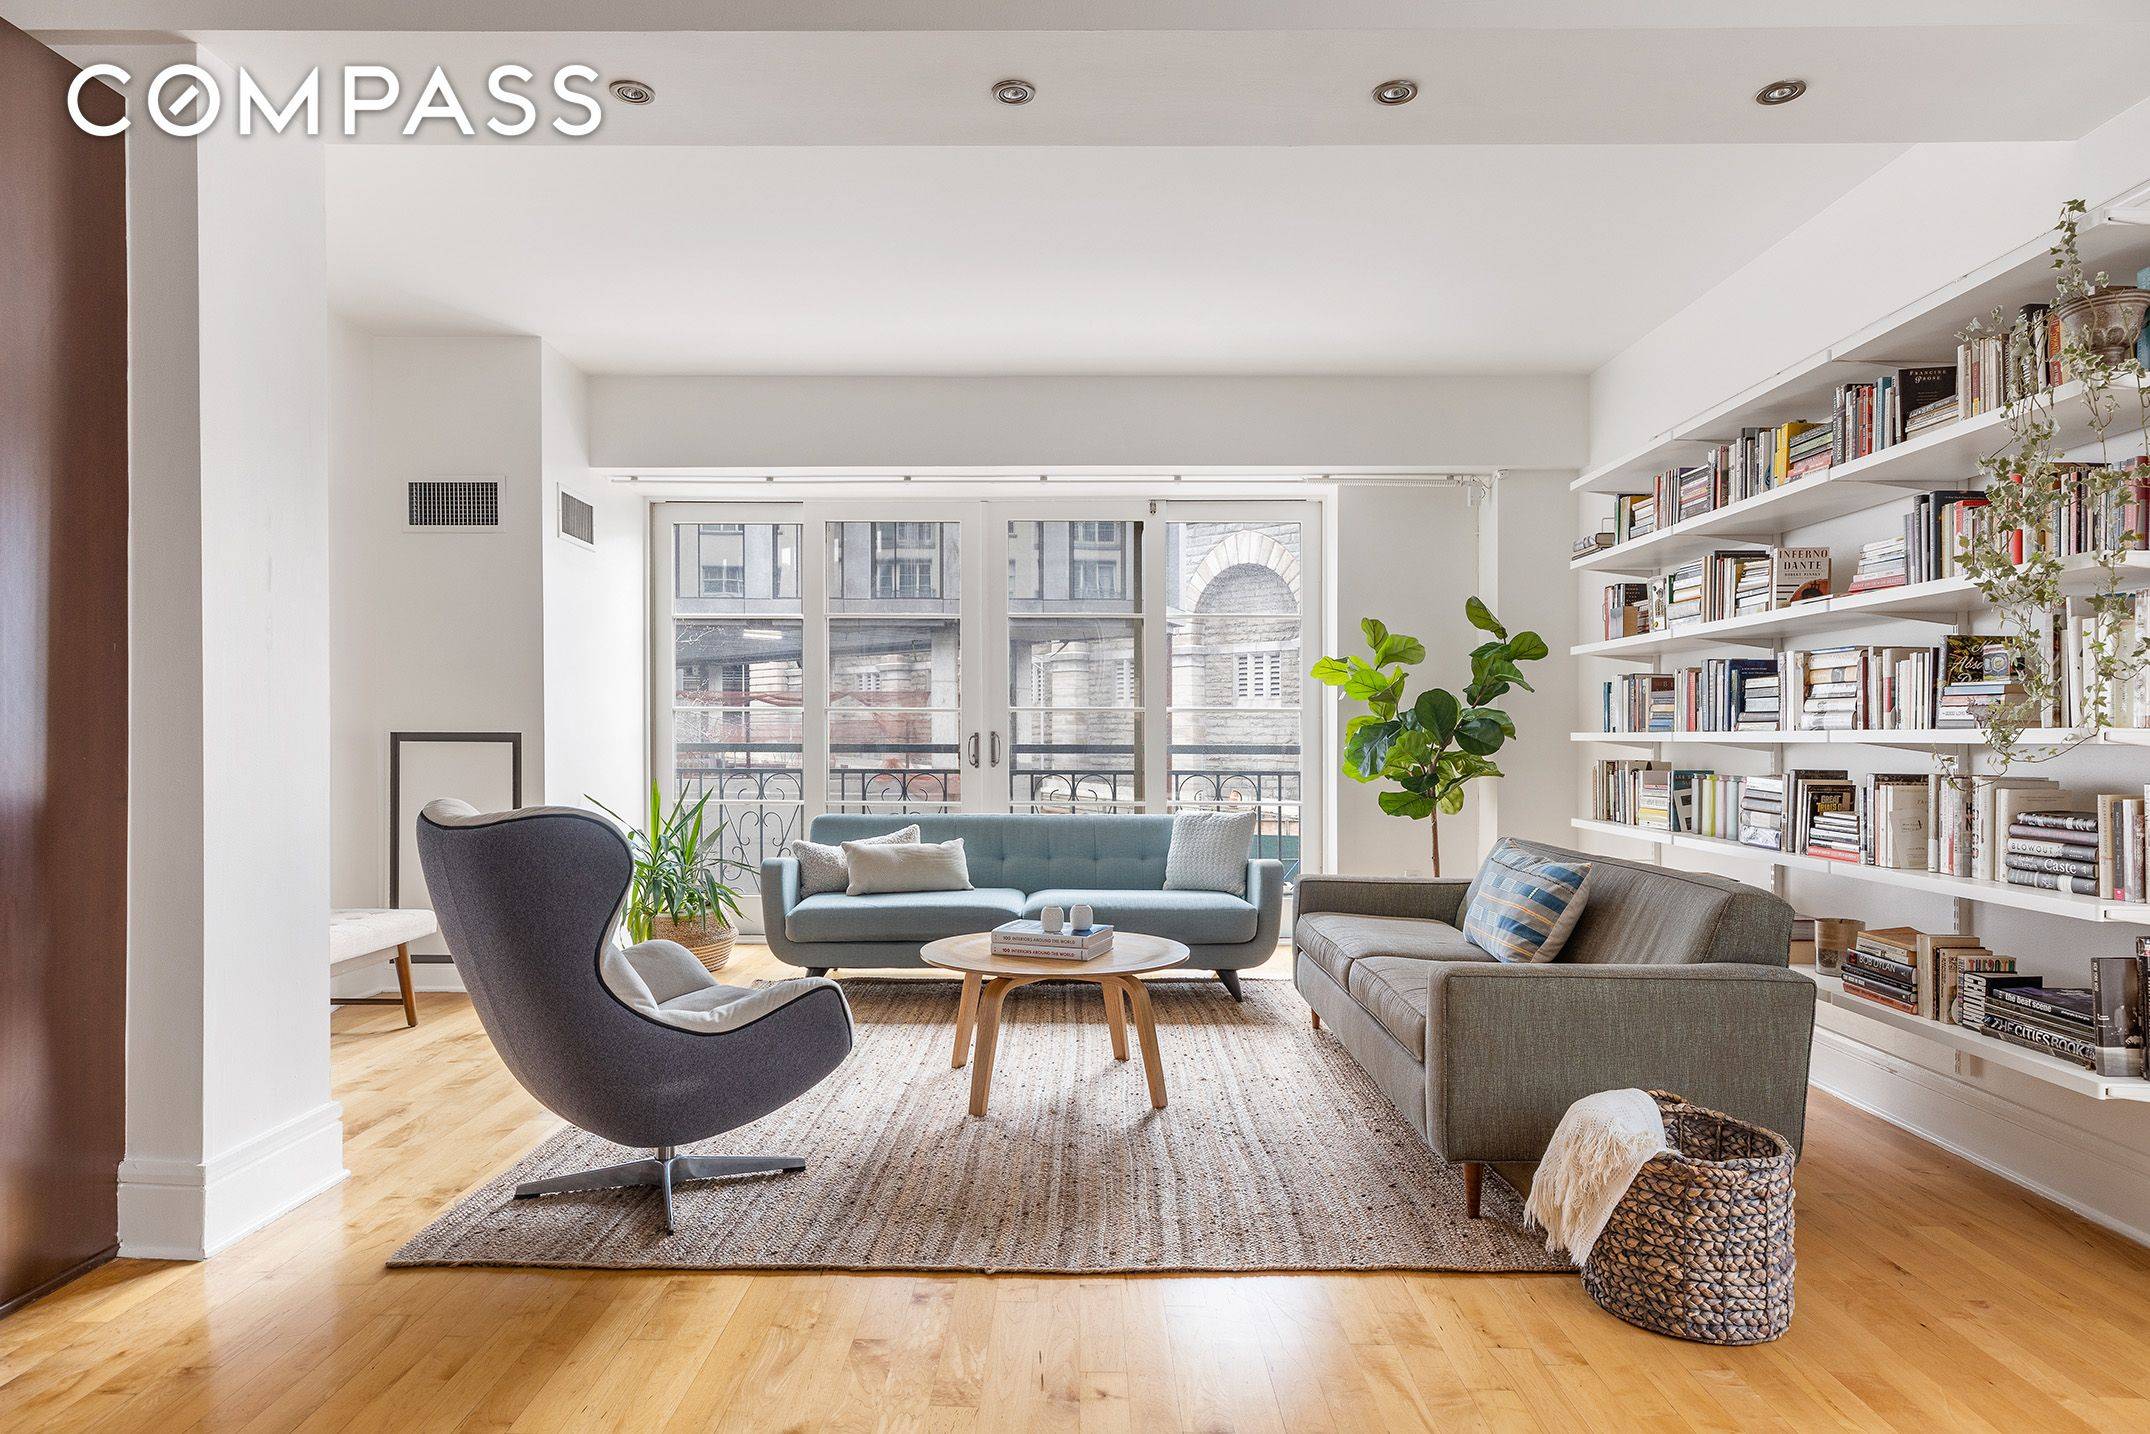 Opportunity awaits in this sprawling four bedroom, three bathroom condominium featuring sun splashed interiors and a flexible floor plan in a historic warehouse building situated on one of Dumbo's best ...